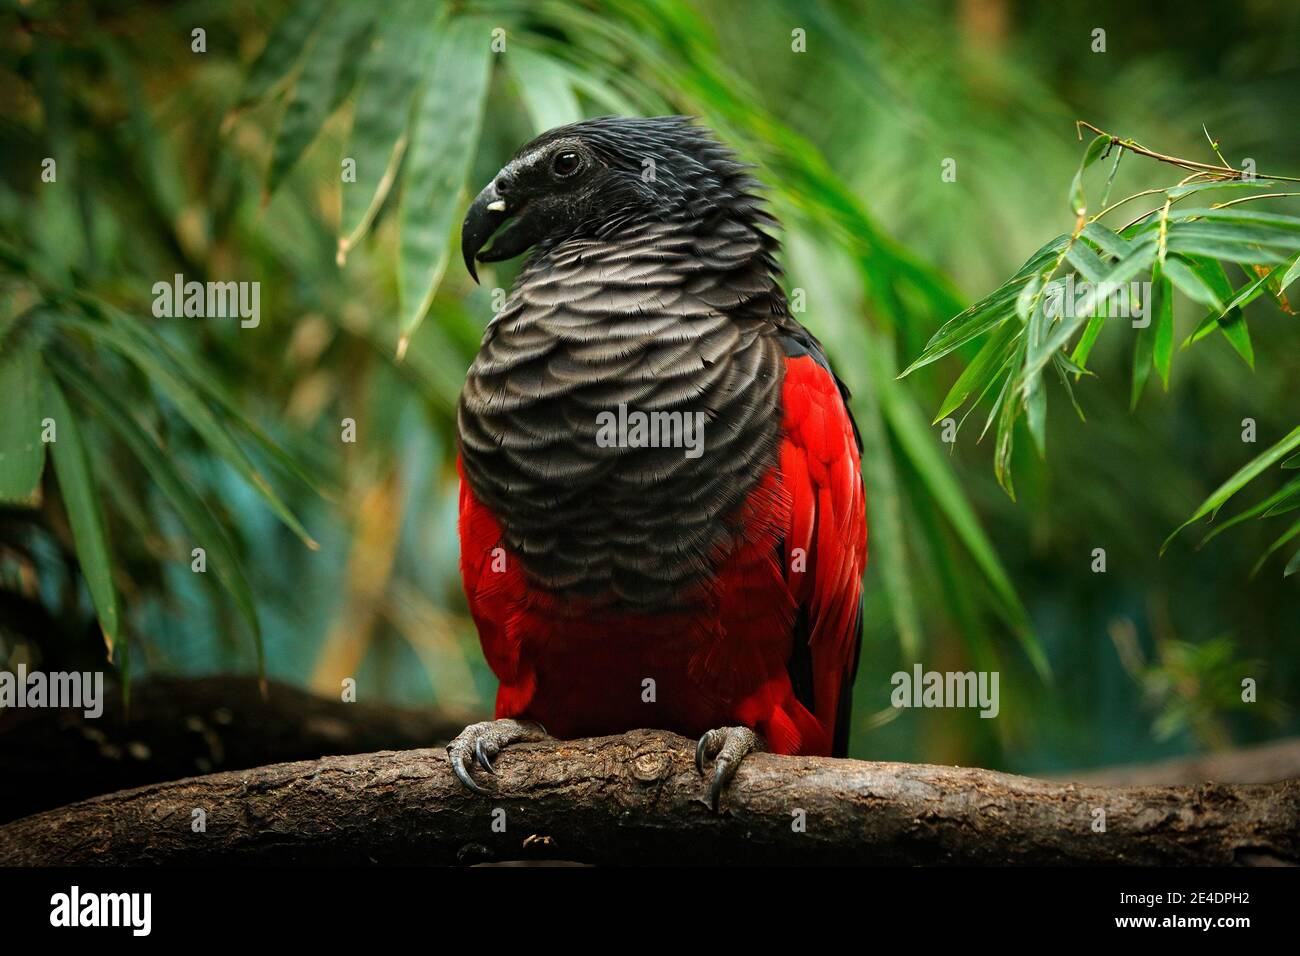 Pesquet parrot, Psittrichas fulgidus, rare bird from New Guinea. Ugly red and black parrot in the nature habitat, dark green forest. Wildlife scene fr Stock Photo